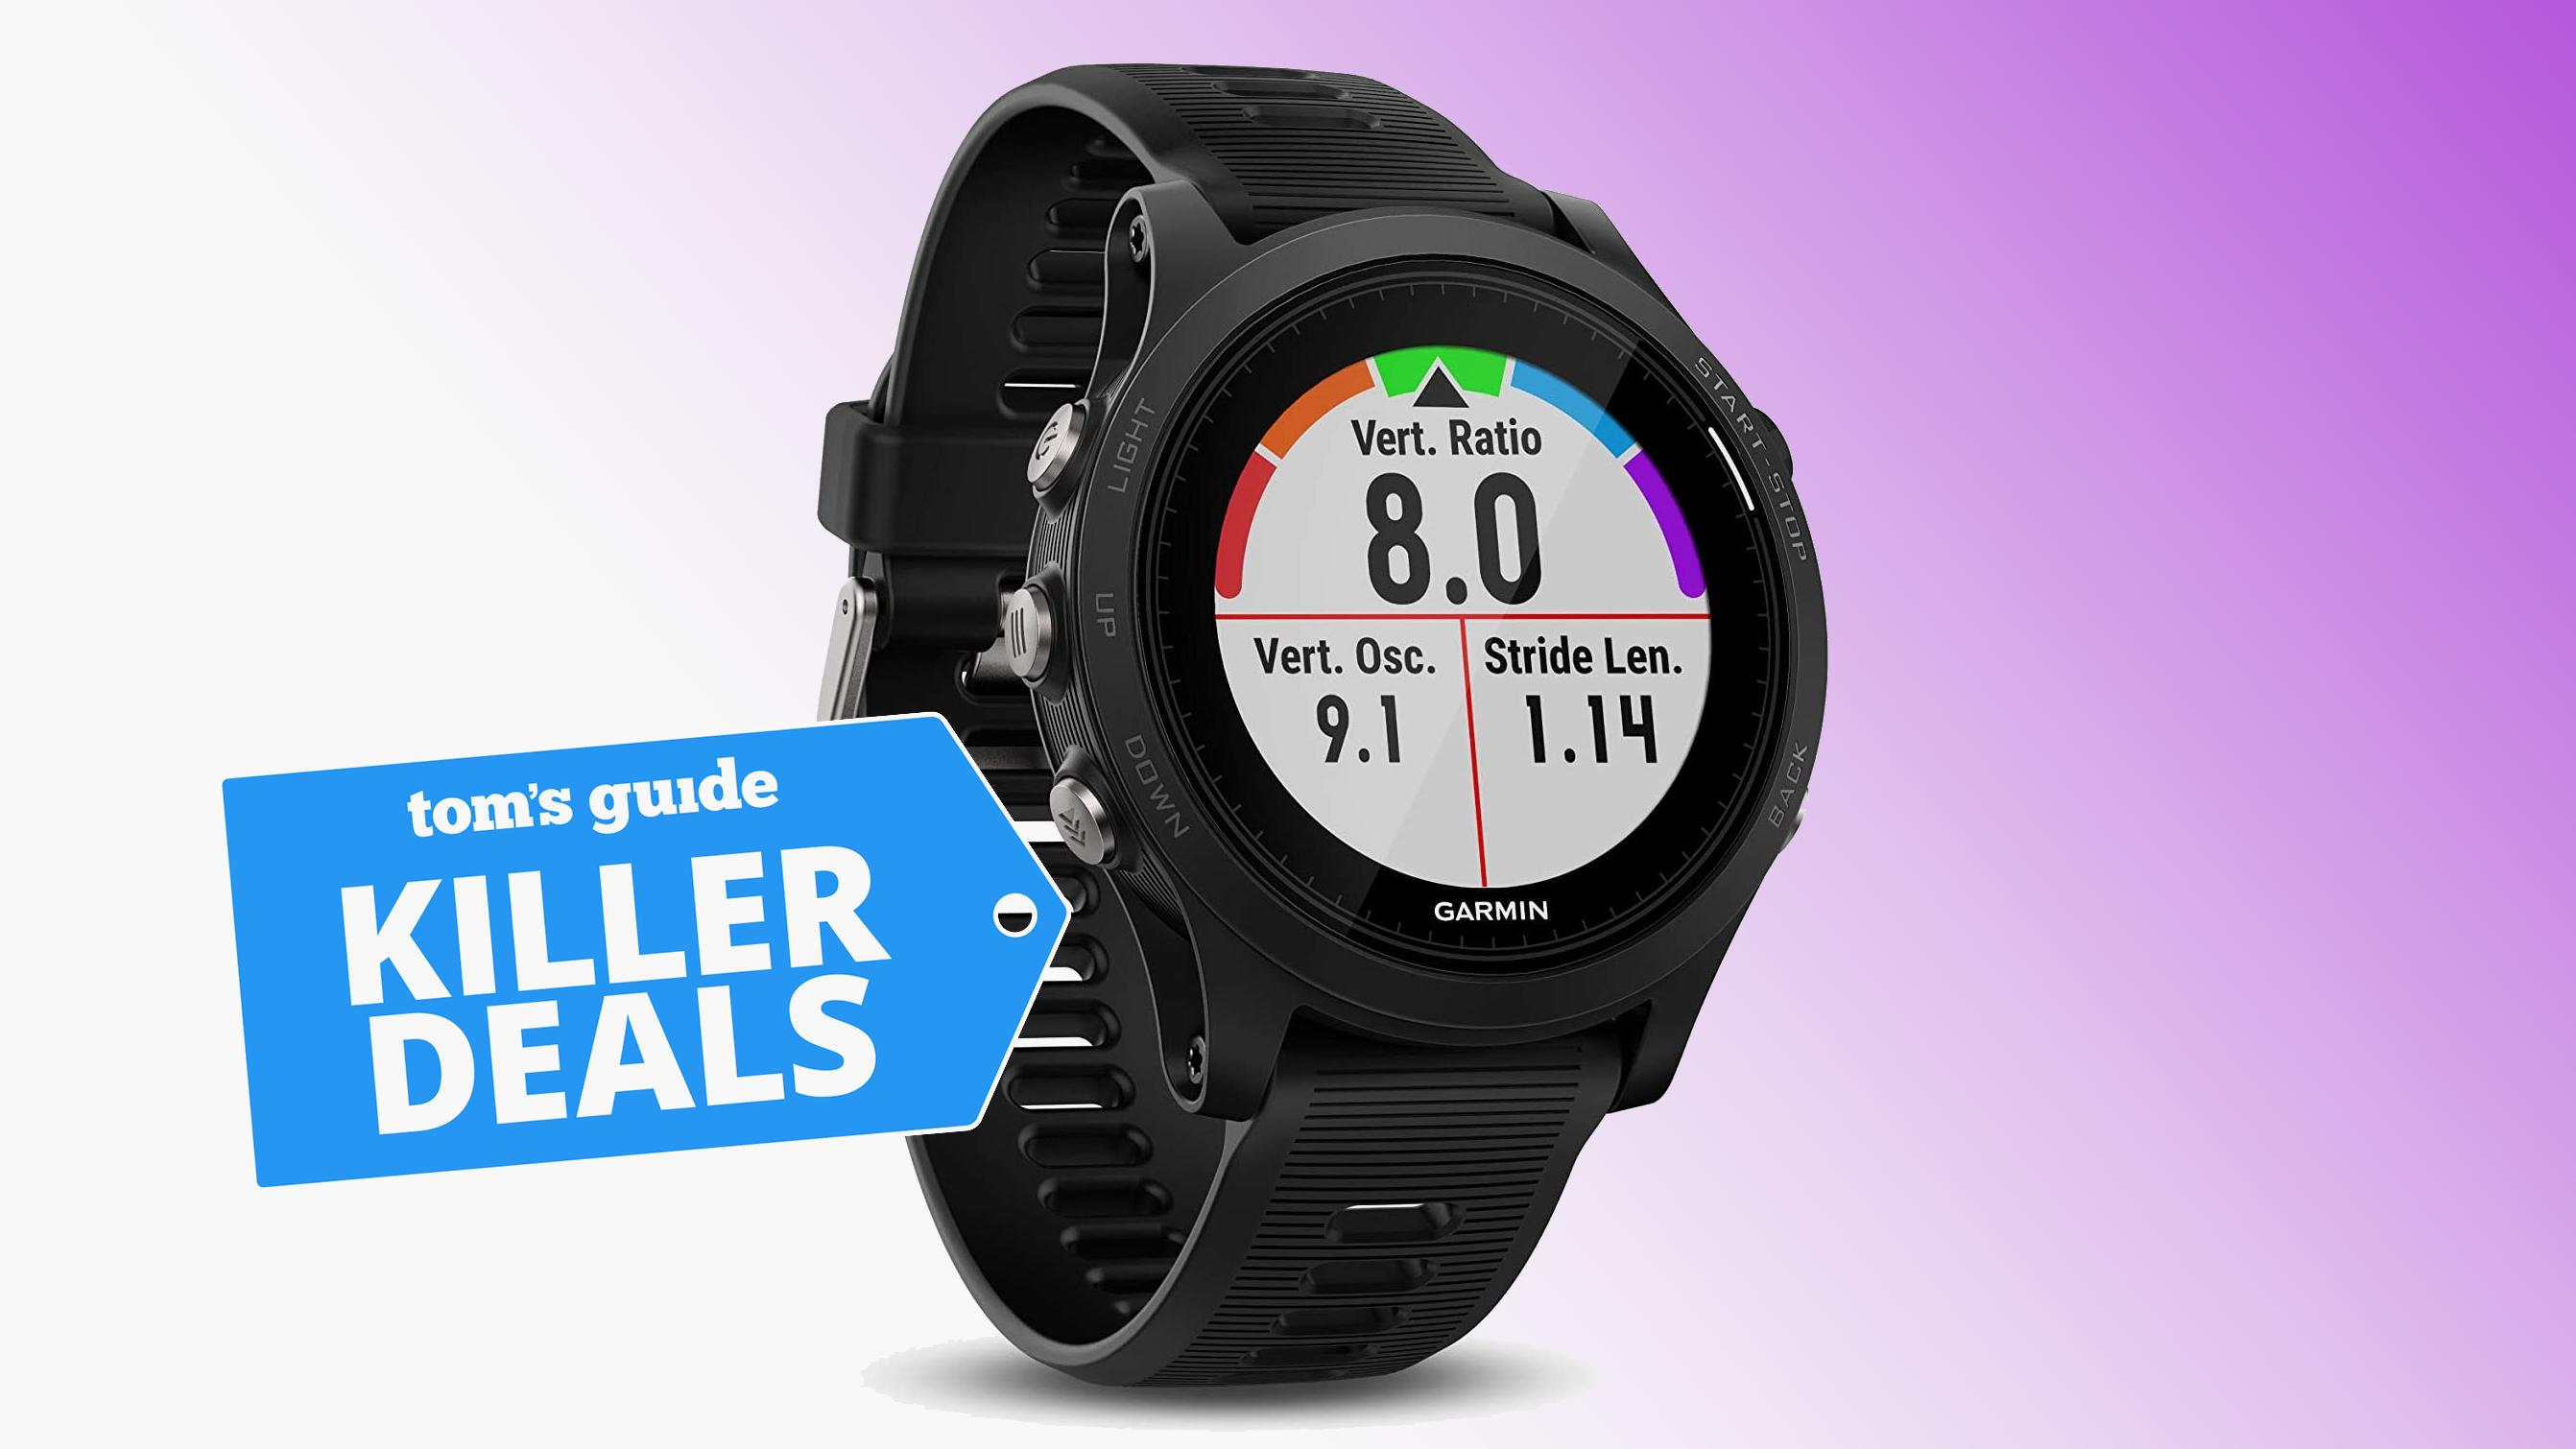 Garmin Forerunner on purple with cyber monday deal tag superimposed